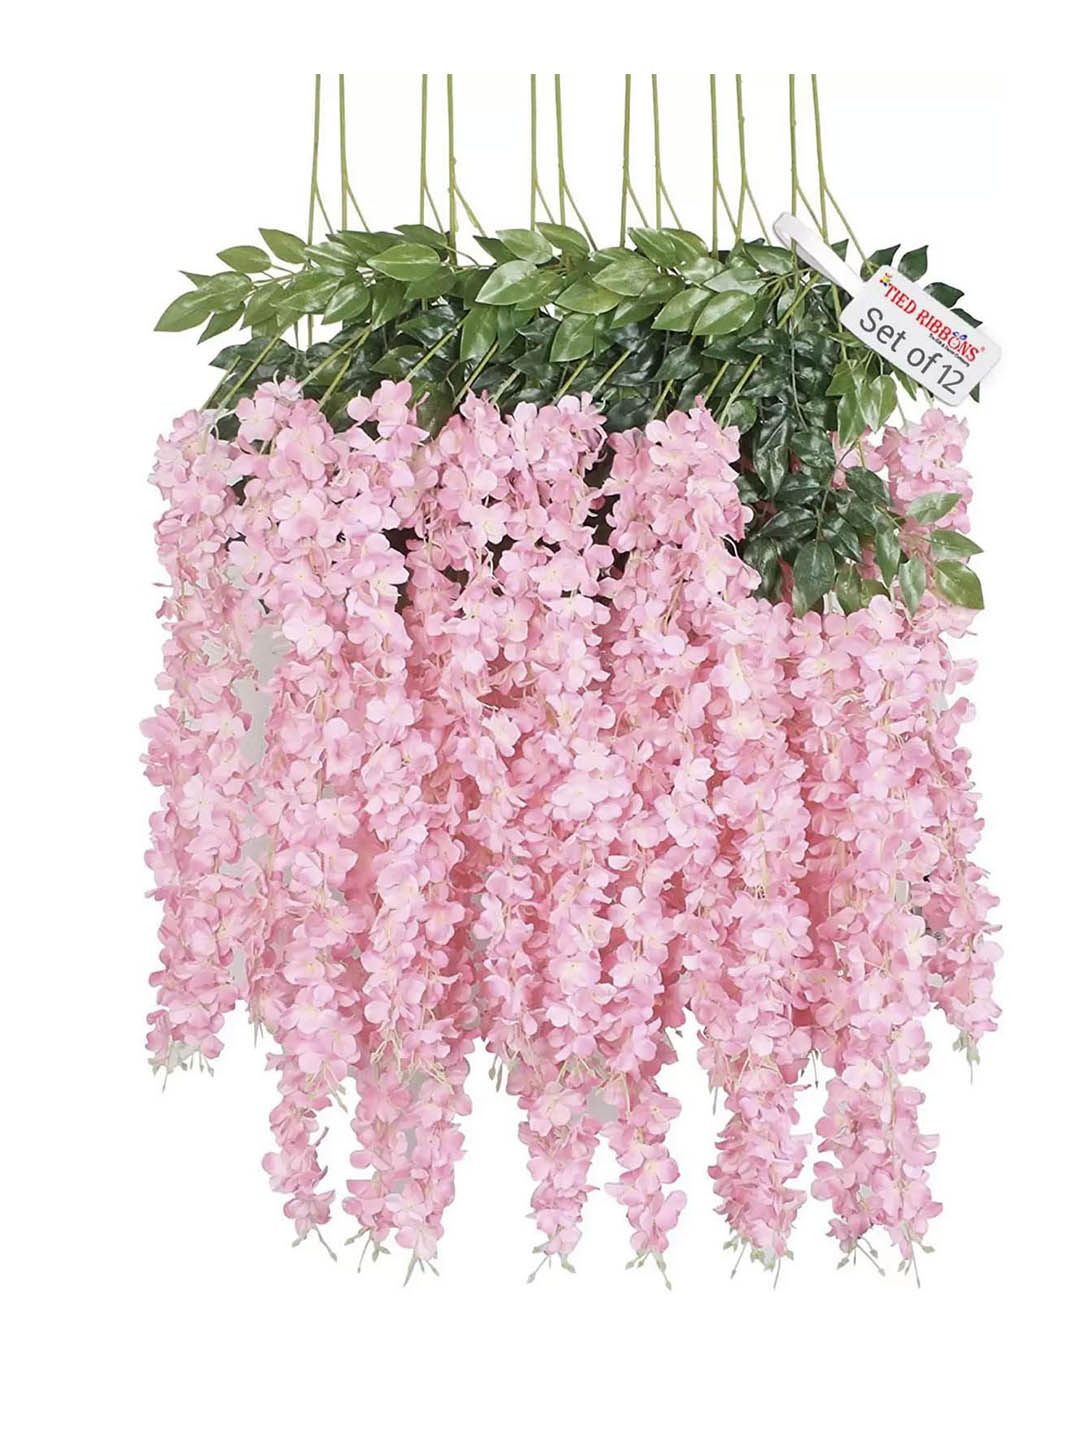 TIED RIBBONS Set Of 12 Pink & Green Artificial Hanging Wisteria Flower-Strings Price in India